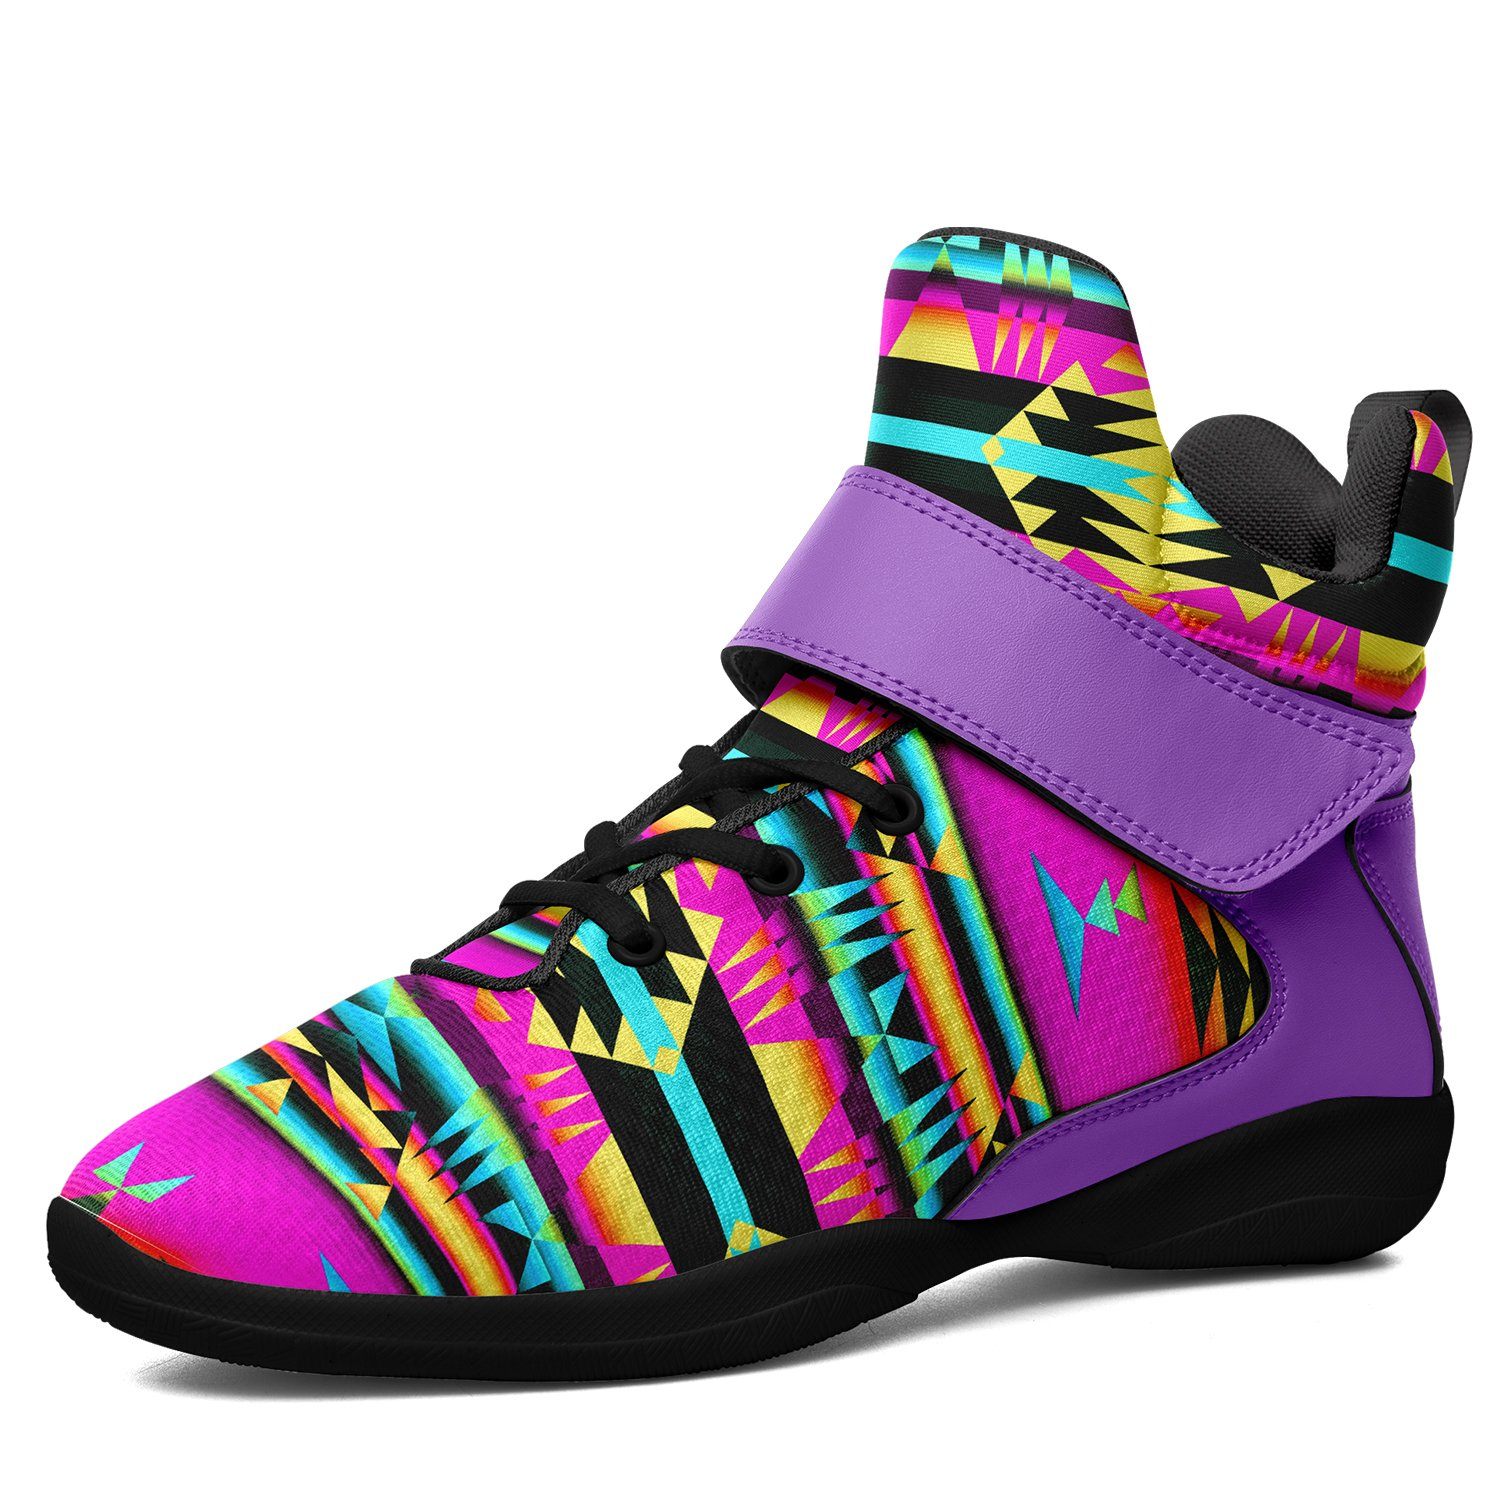 Between the Sunset Mountains Ipottaa Basketball / Sport High Top Shoes 49 Dzine US Child 12.5 / EUR 30 Black Sole with Lavender Strap 